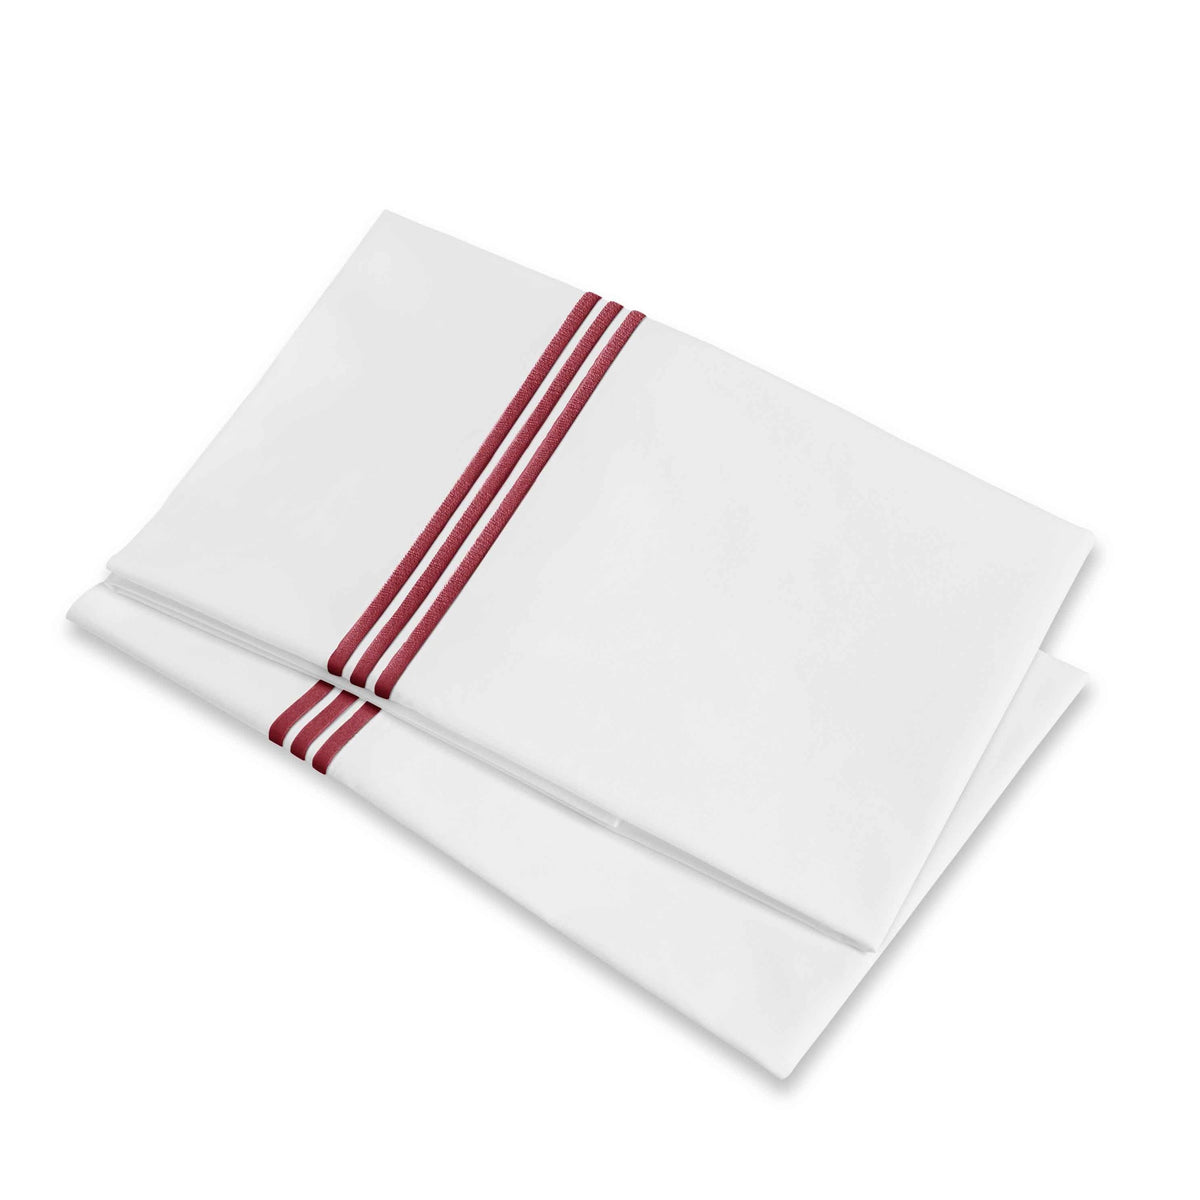 Folded Pillowcases of Signoria Platinum Percale Bedding in White/Cardinale Red Color